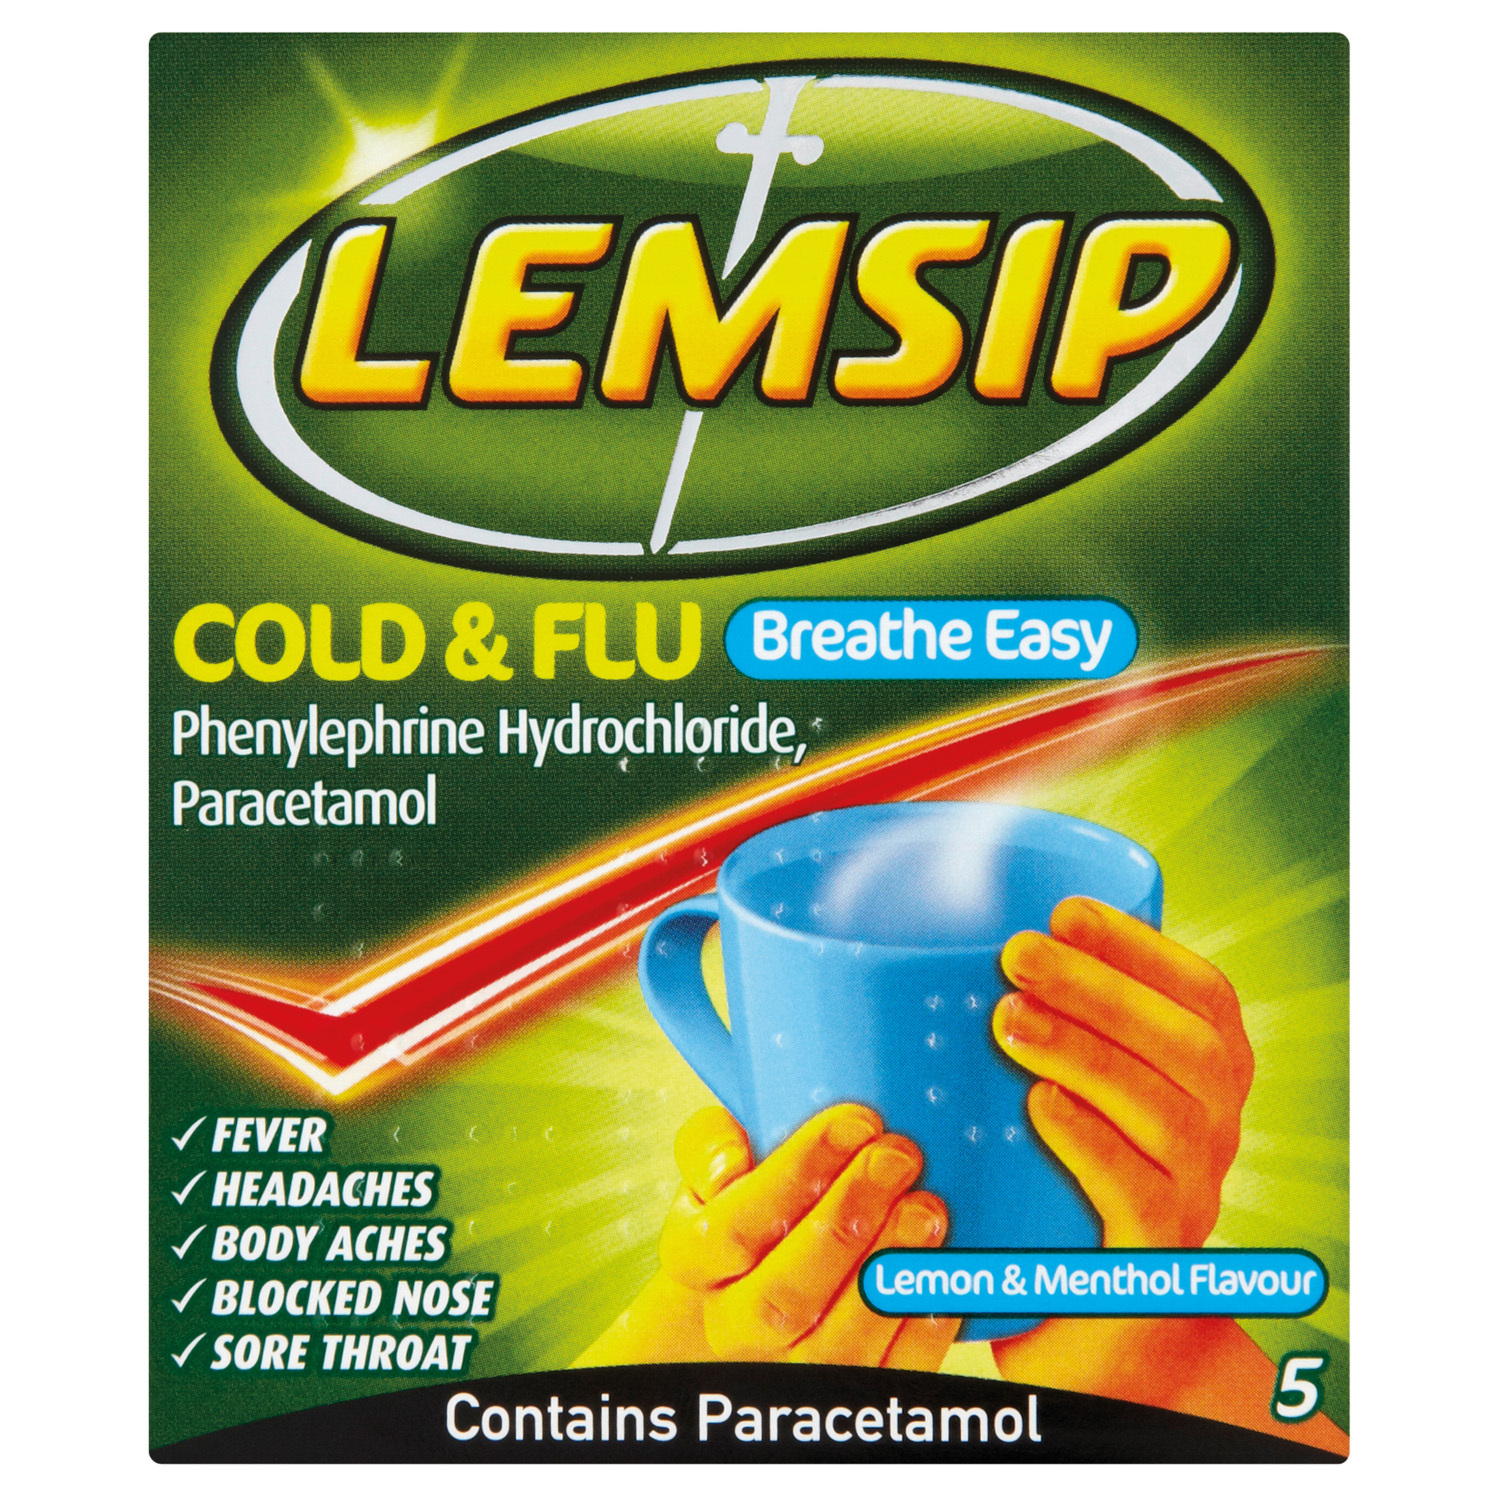 Lemsip Cold and Flu Breathe Easy Sachets Image